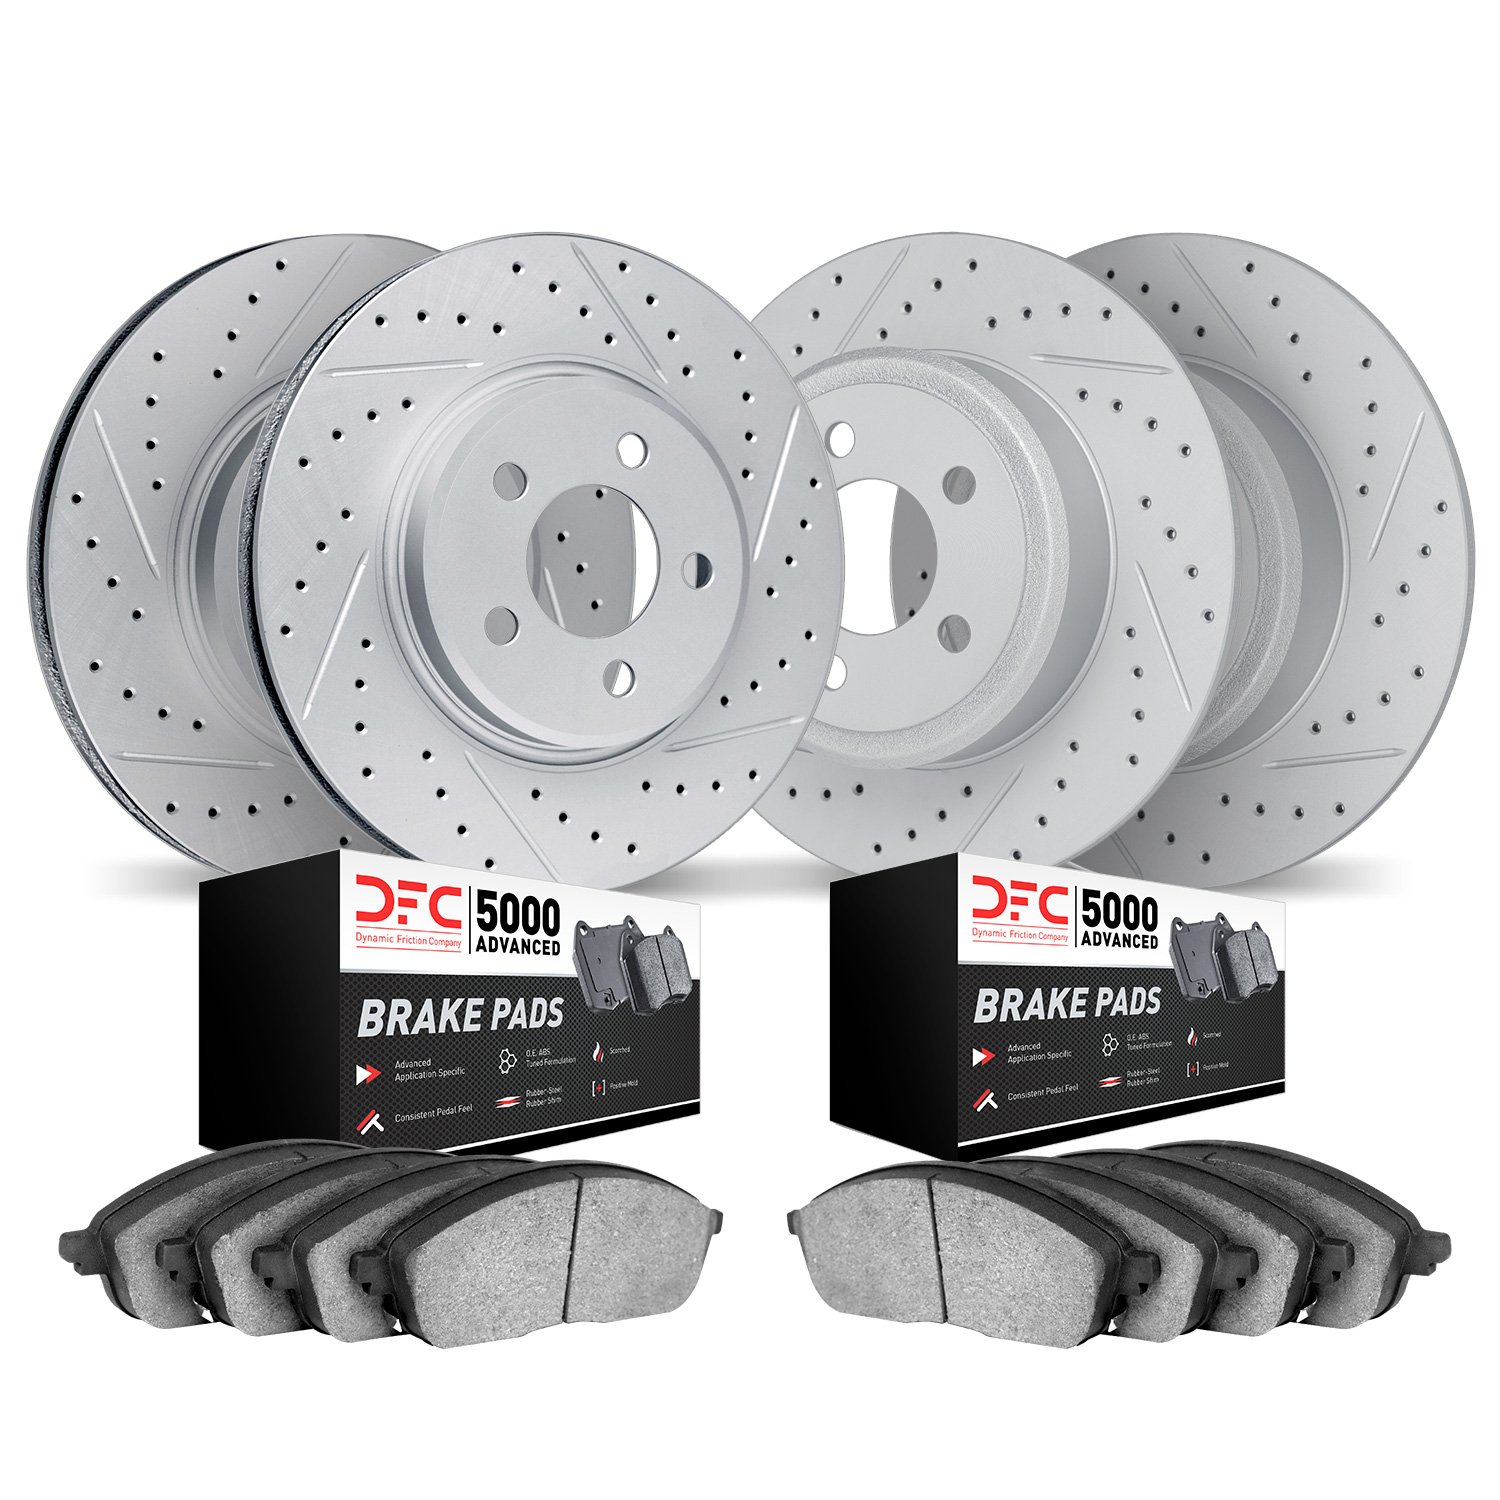 2504-65002 Geoperformance Drilled/Slotted Rotors w/5000 Advanced Brake Pads Kit, 2003-2003 GM, Position: Front and Rear